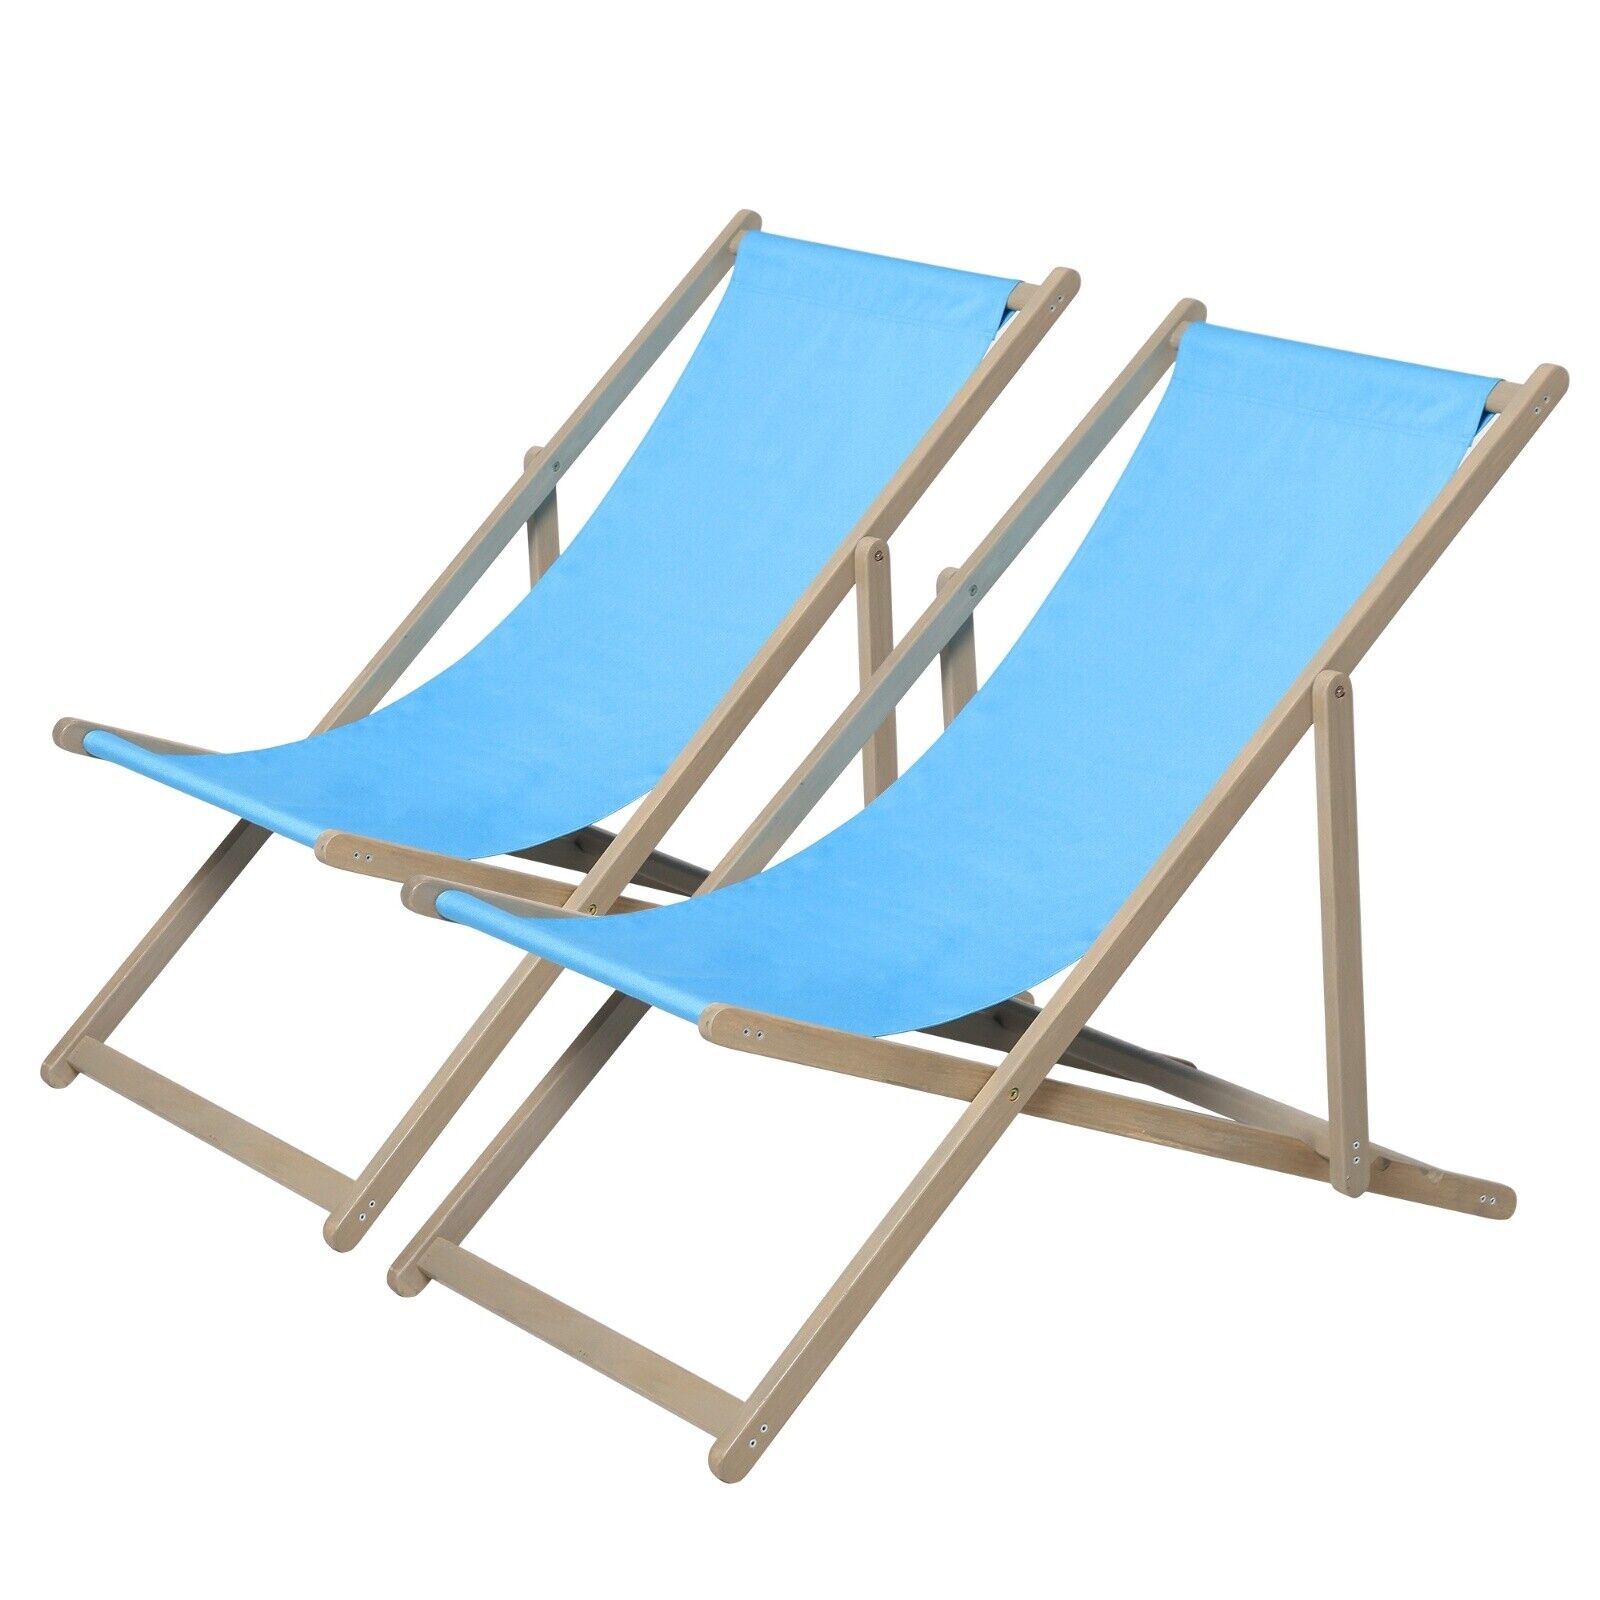 Wooden Folding Beach Sling Patio Chairs Set of 2, 3-Level Adjustable